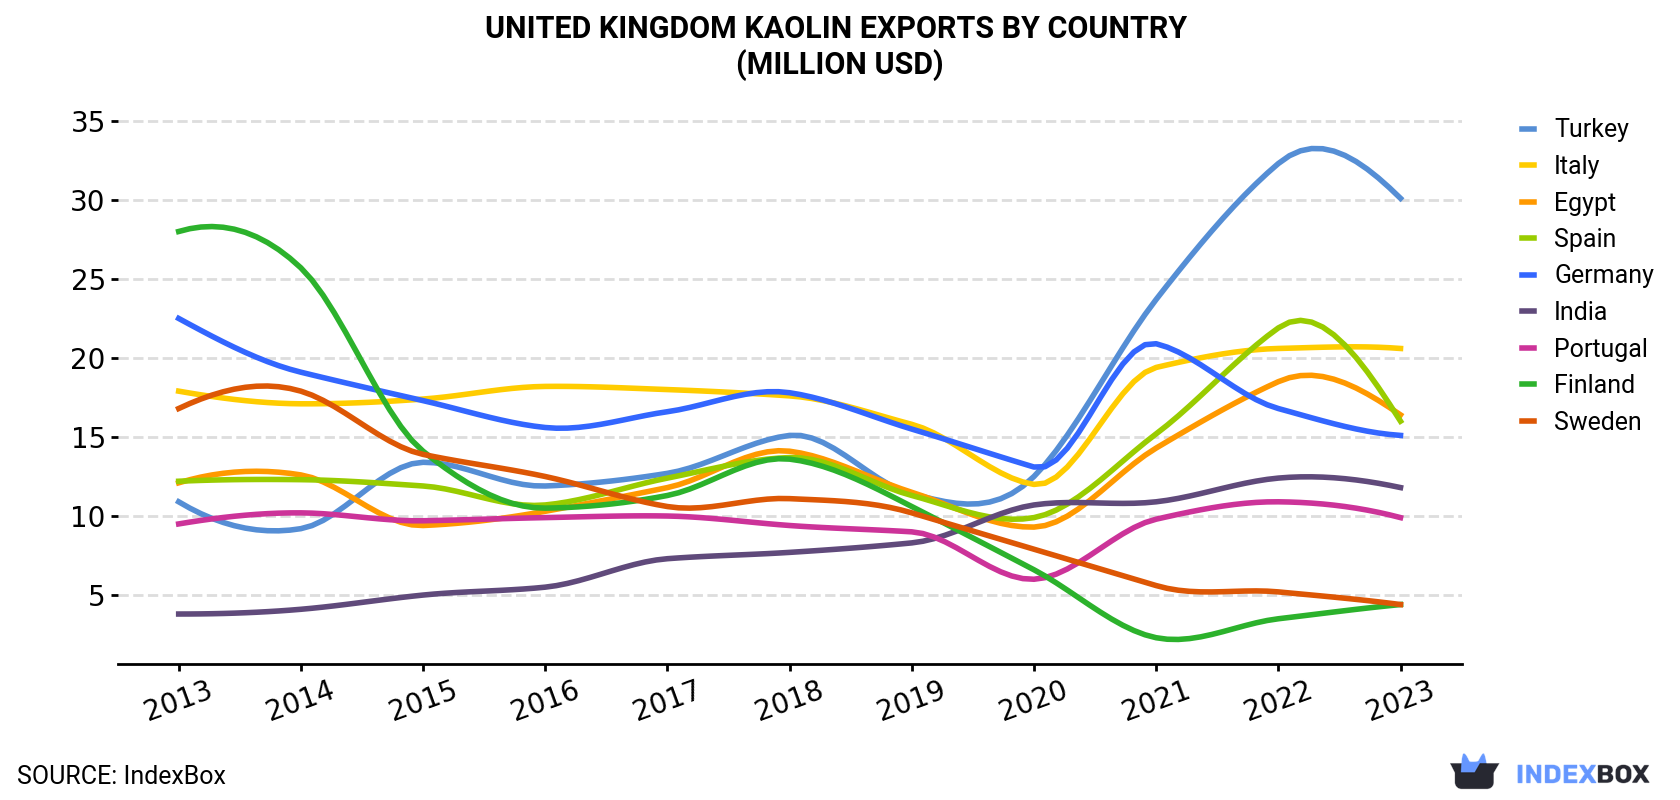 United Kingdom Kaolin Exports By Country (Million USD)